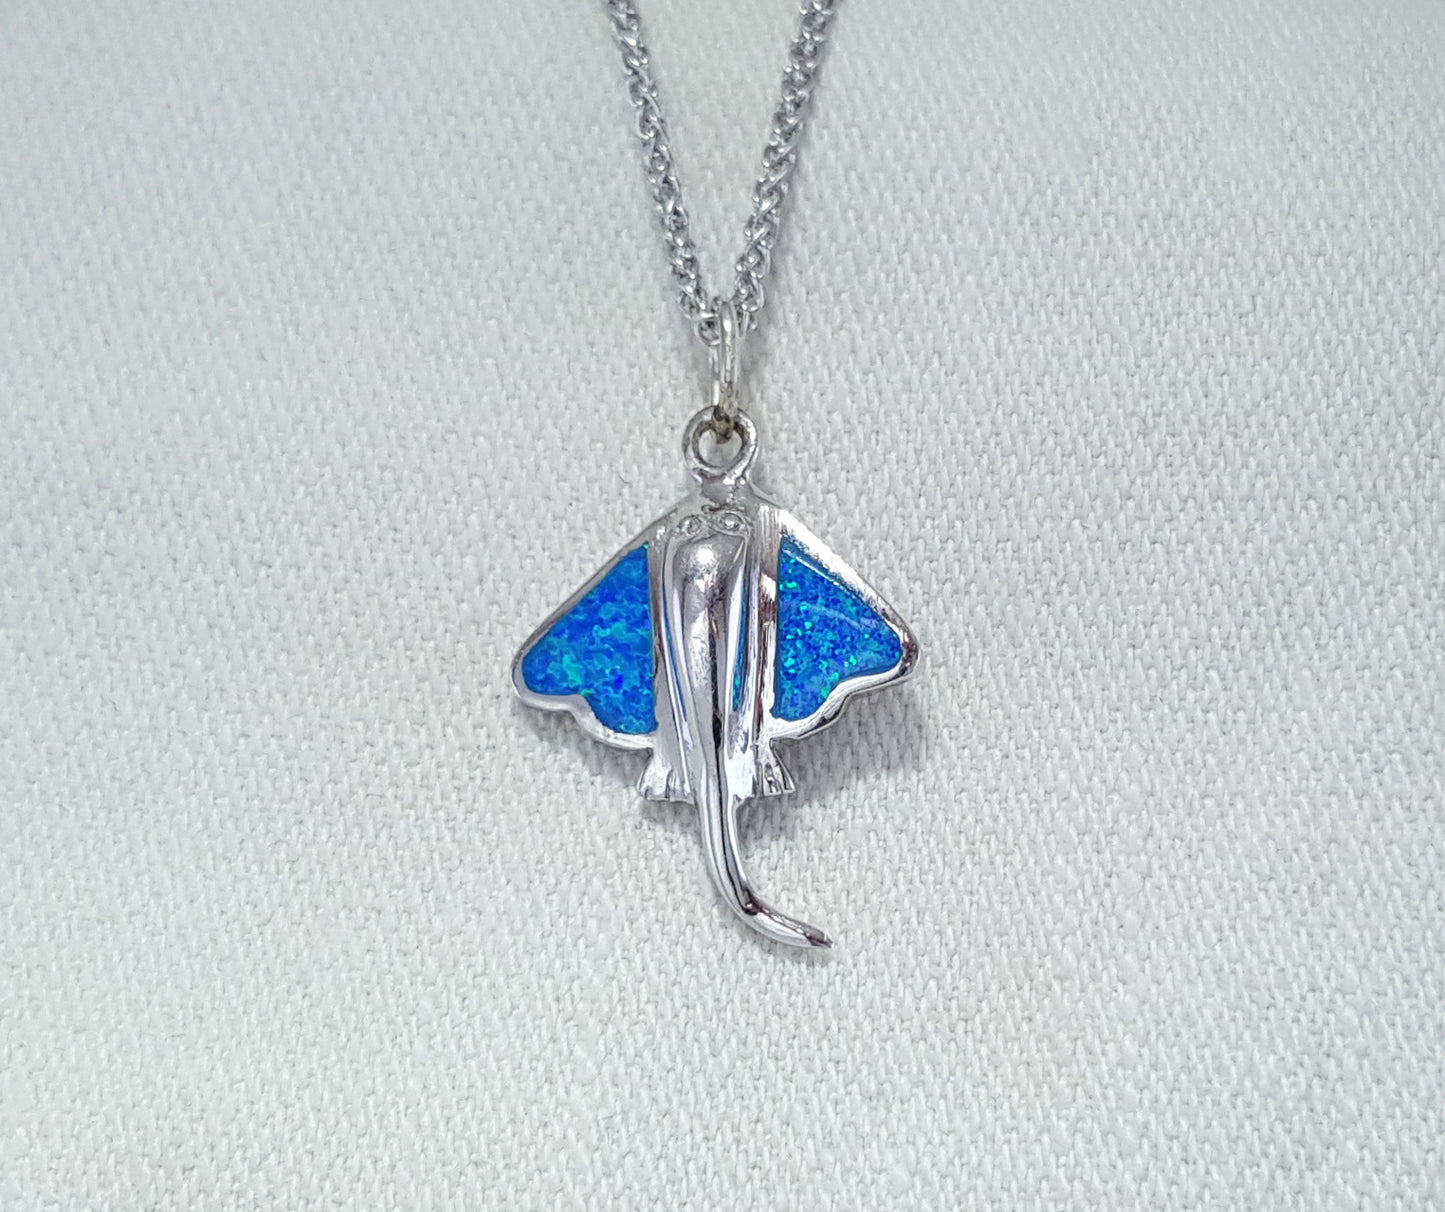 Crushed Opal manta ray or sting ray pendant set in Sterling Silver 